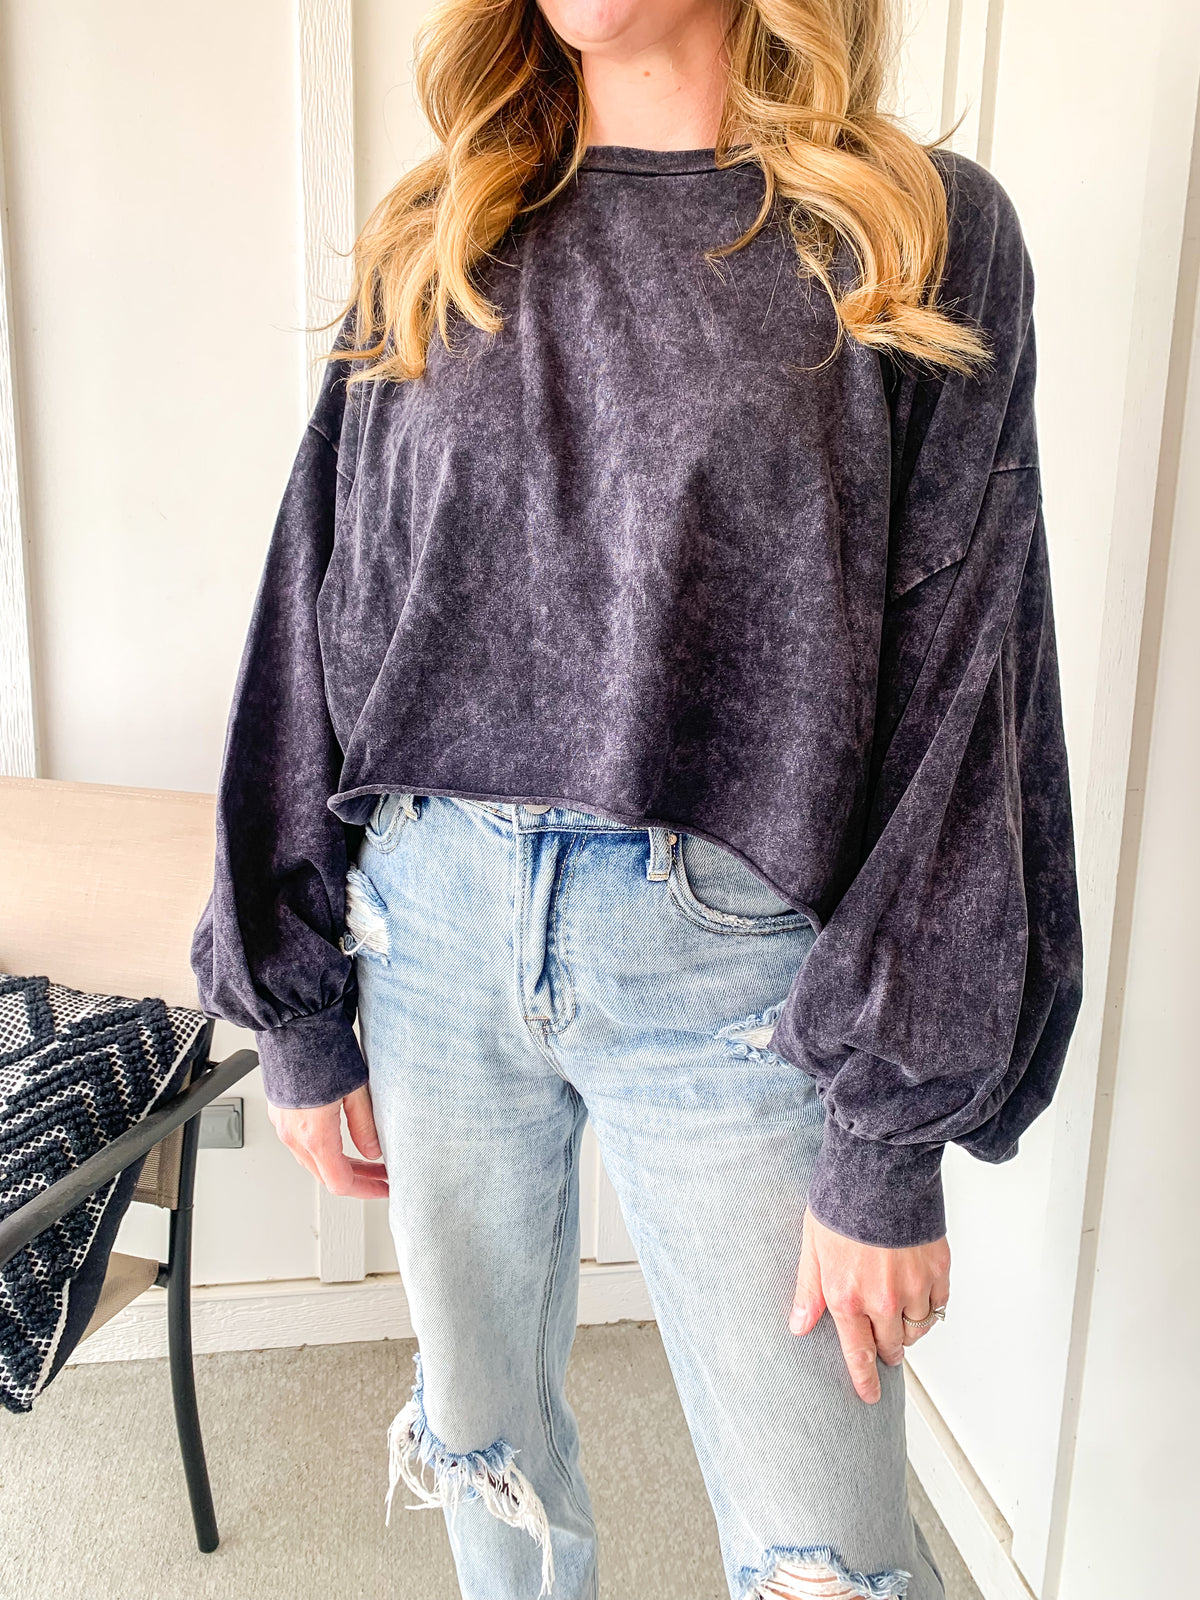 Mineral Washed Crop Top